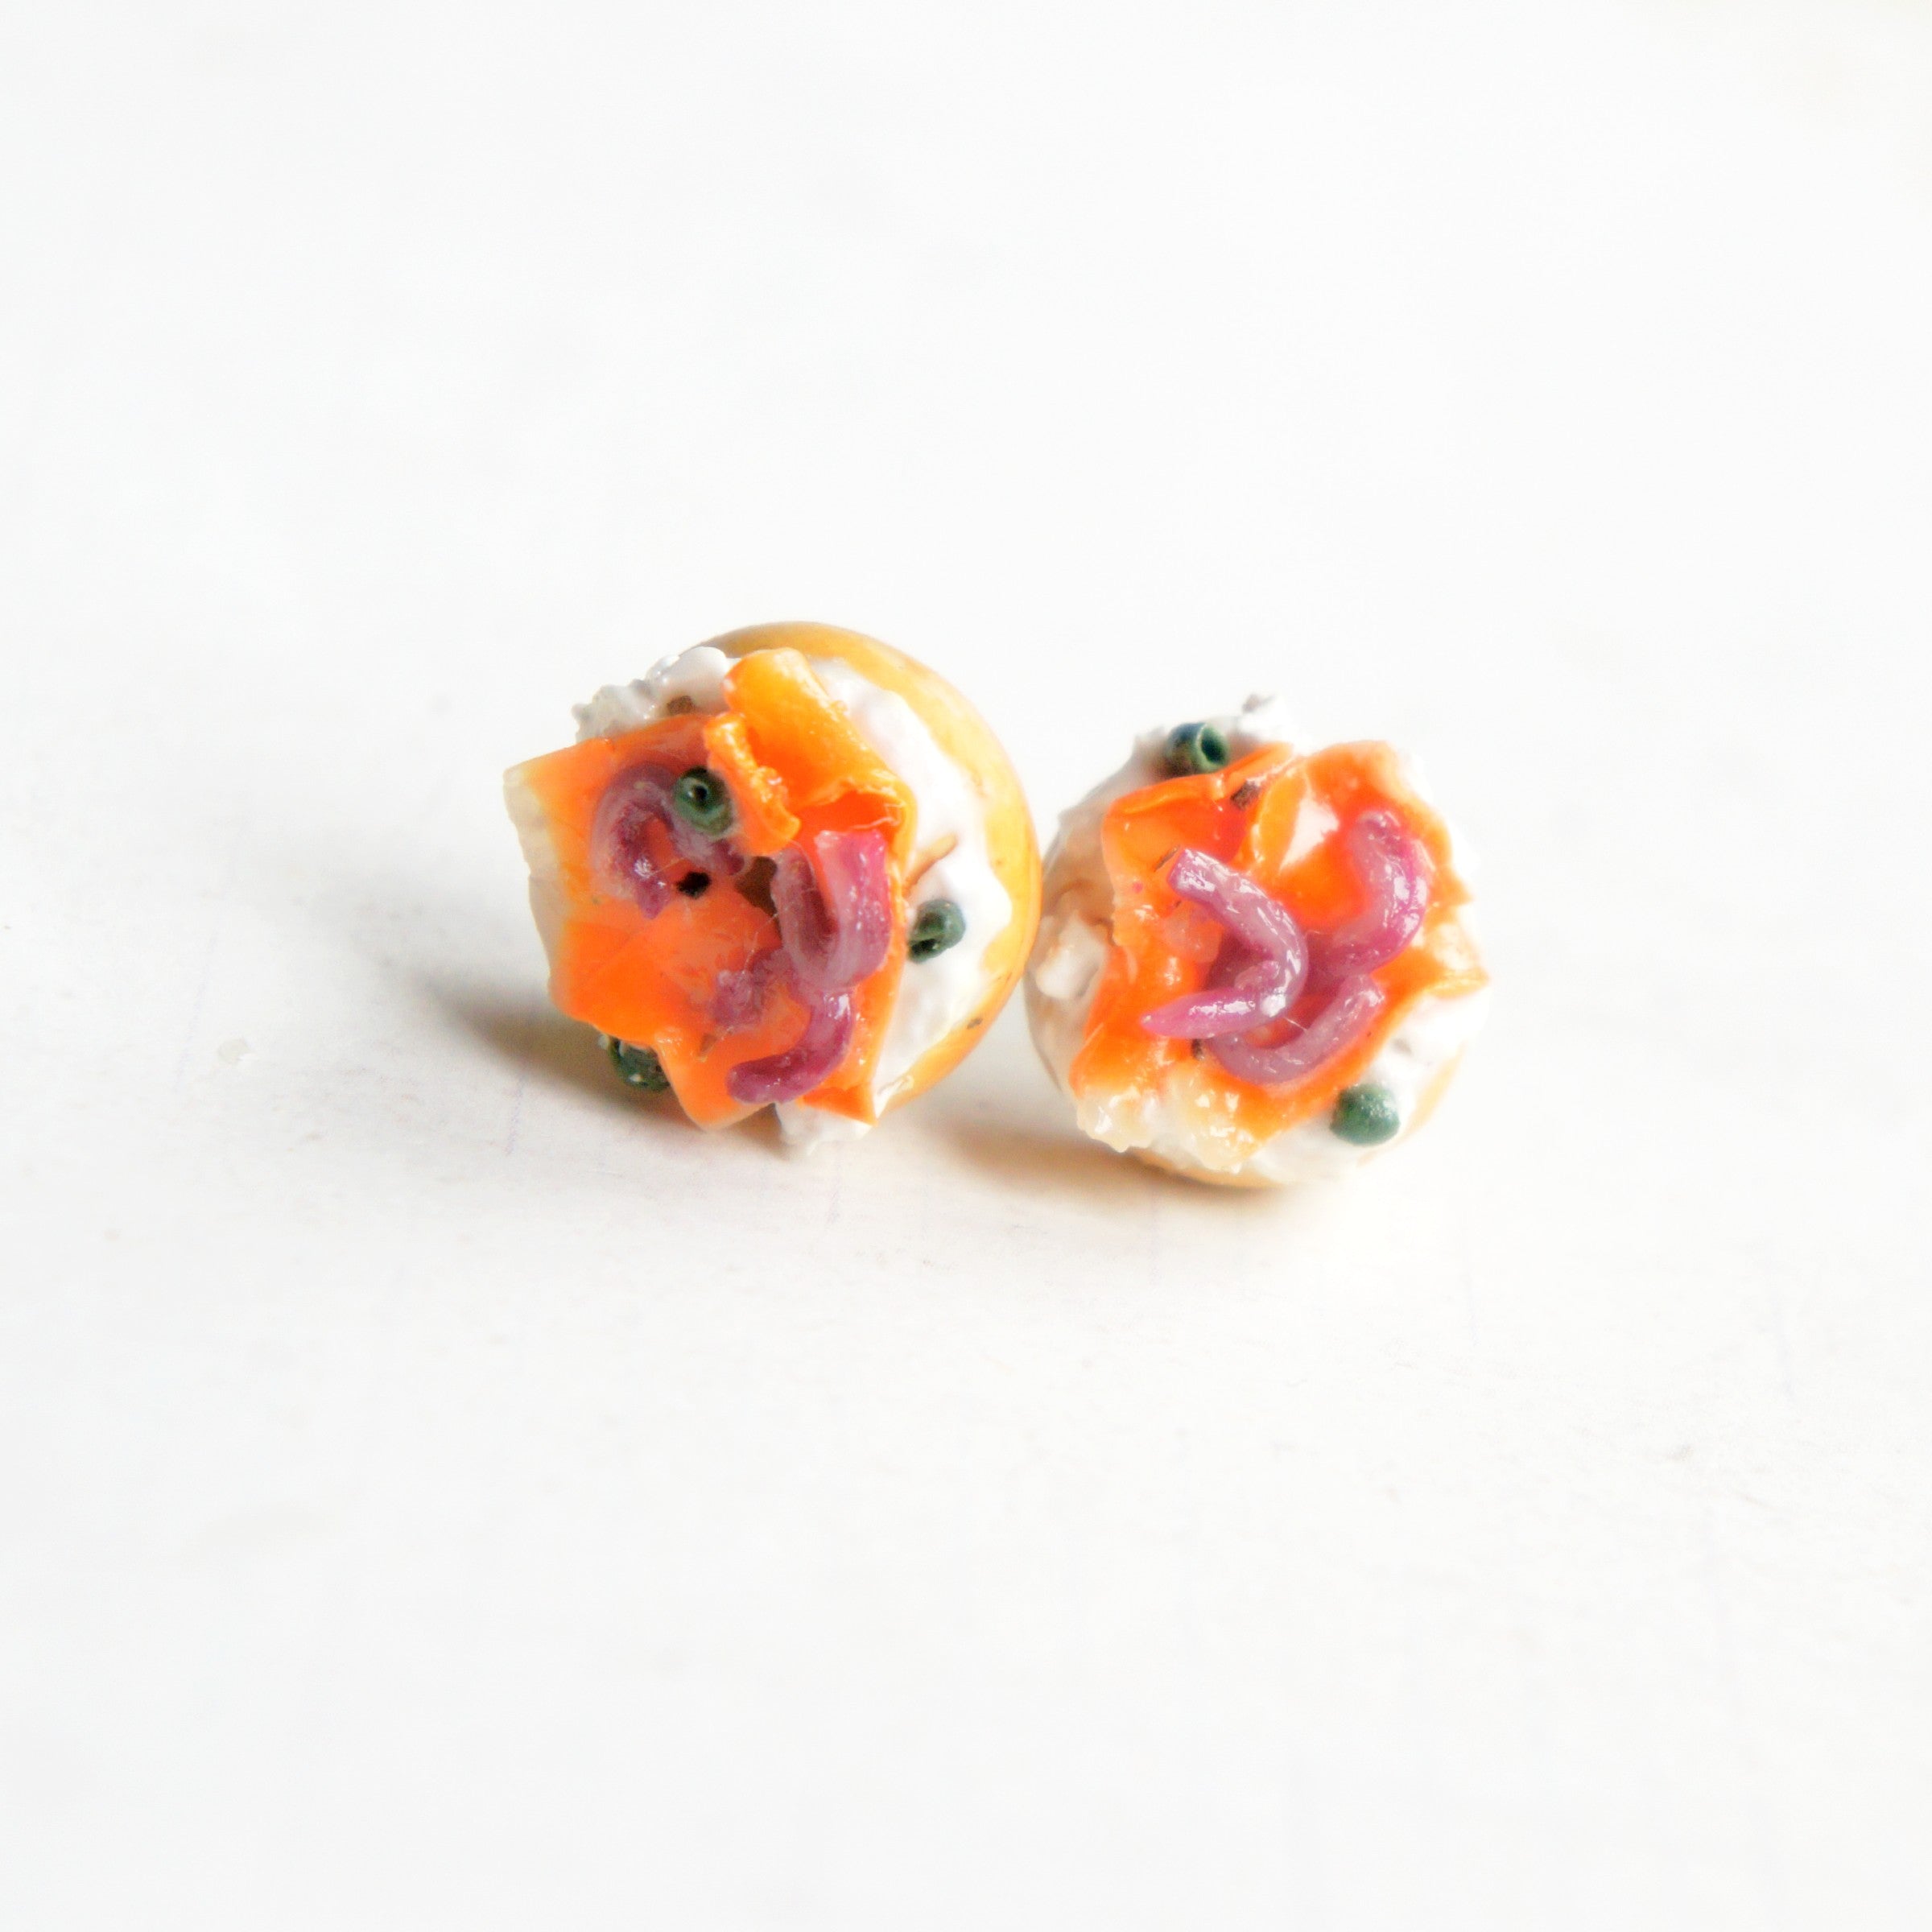 Bagel and Lox Stud Earrings - Jillicious charms and accessories